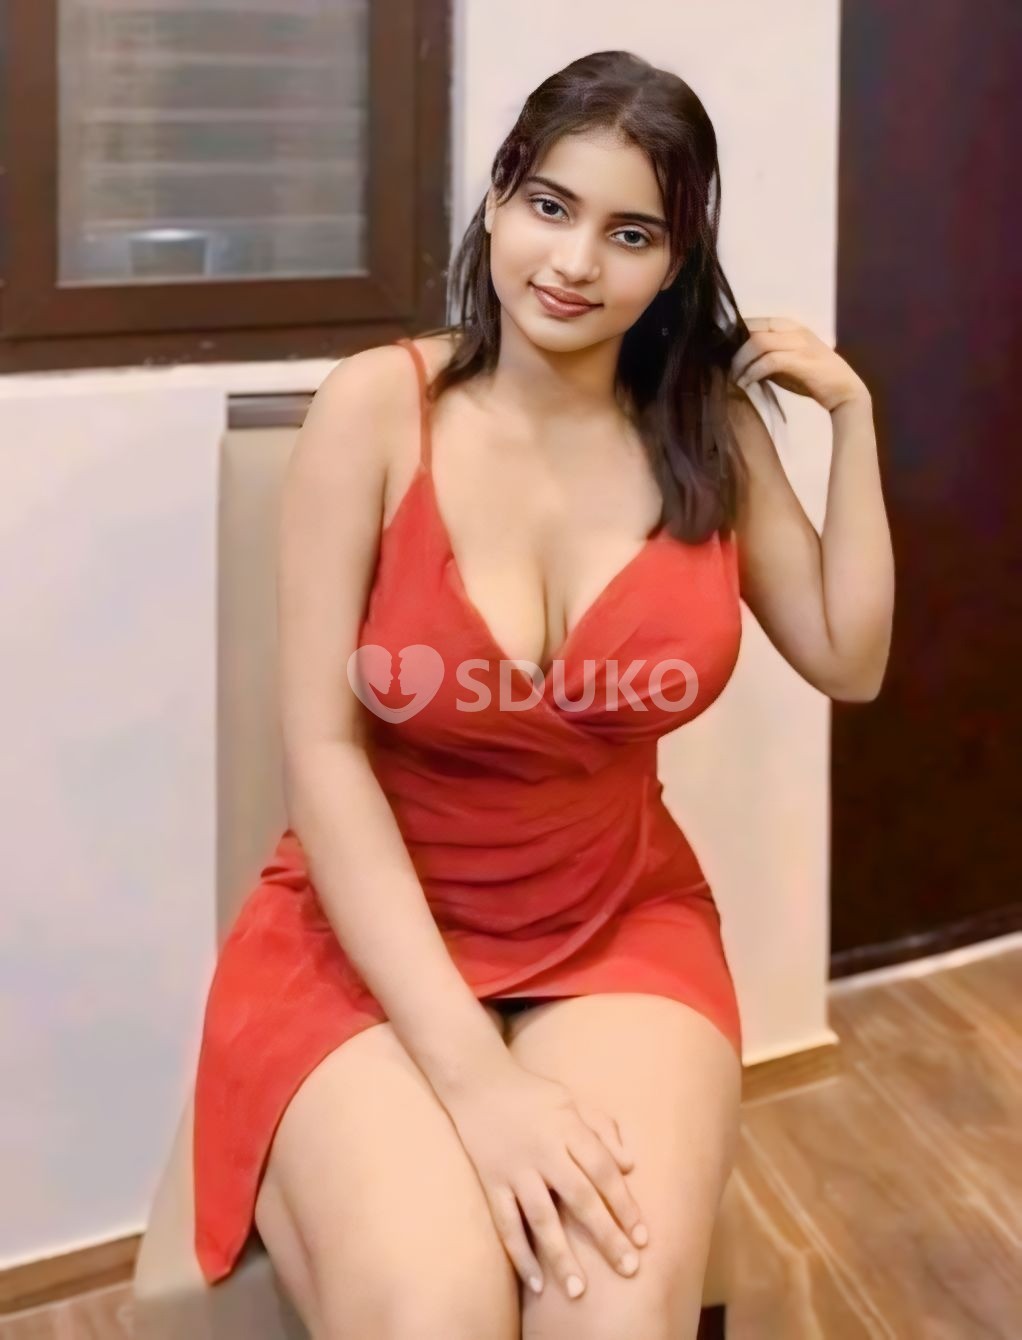 SECUNDERABAD BEST-PRICE VIP ✅ GIRLS 💯% SAFE  ESCORT CALL GIRL SERVICE 24X7 AVAILABLE